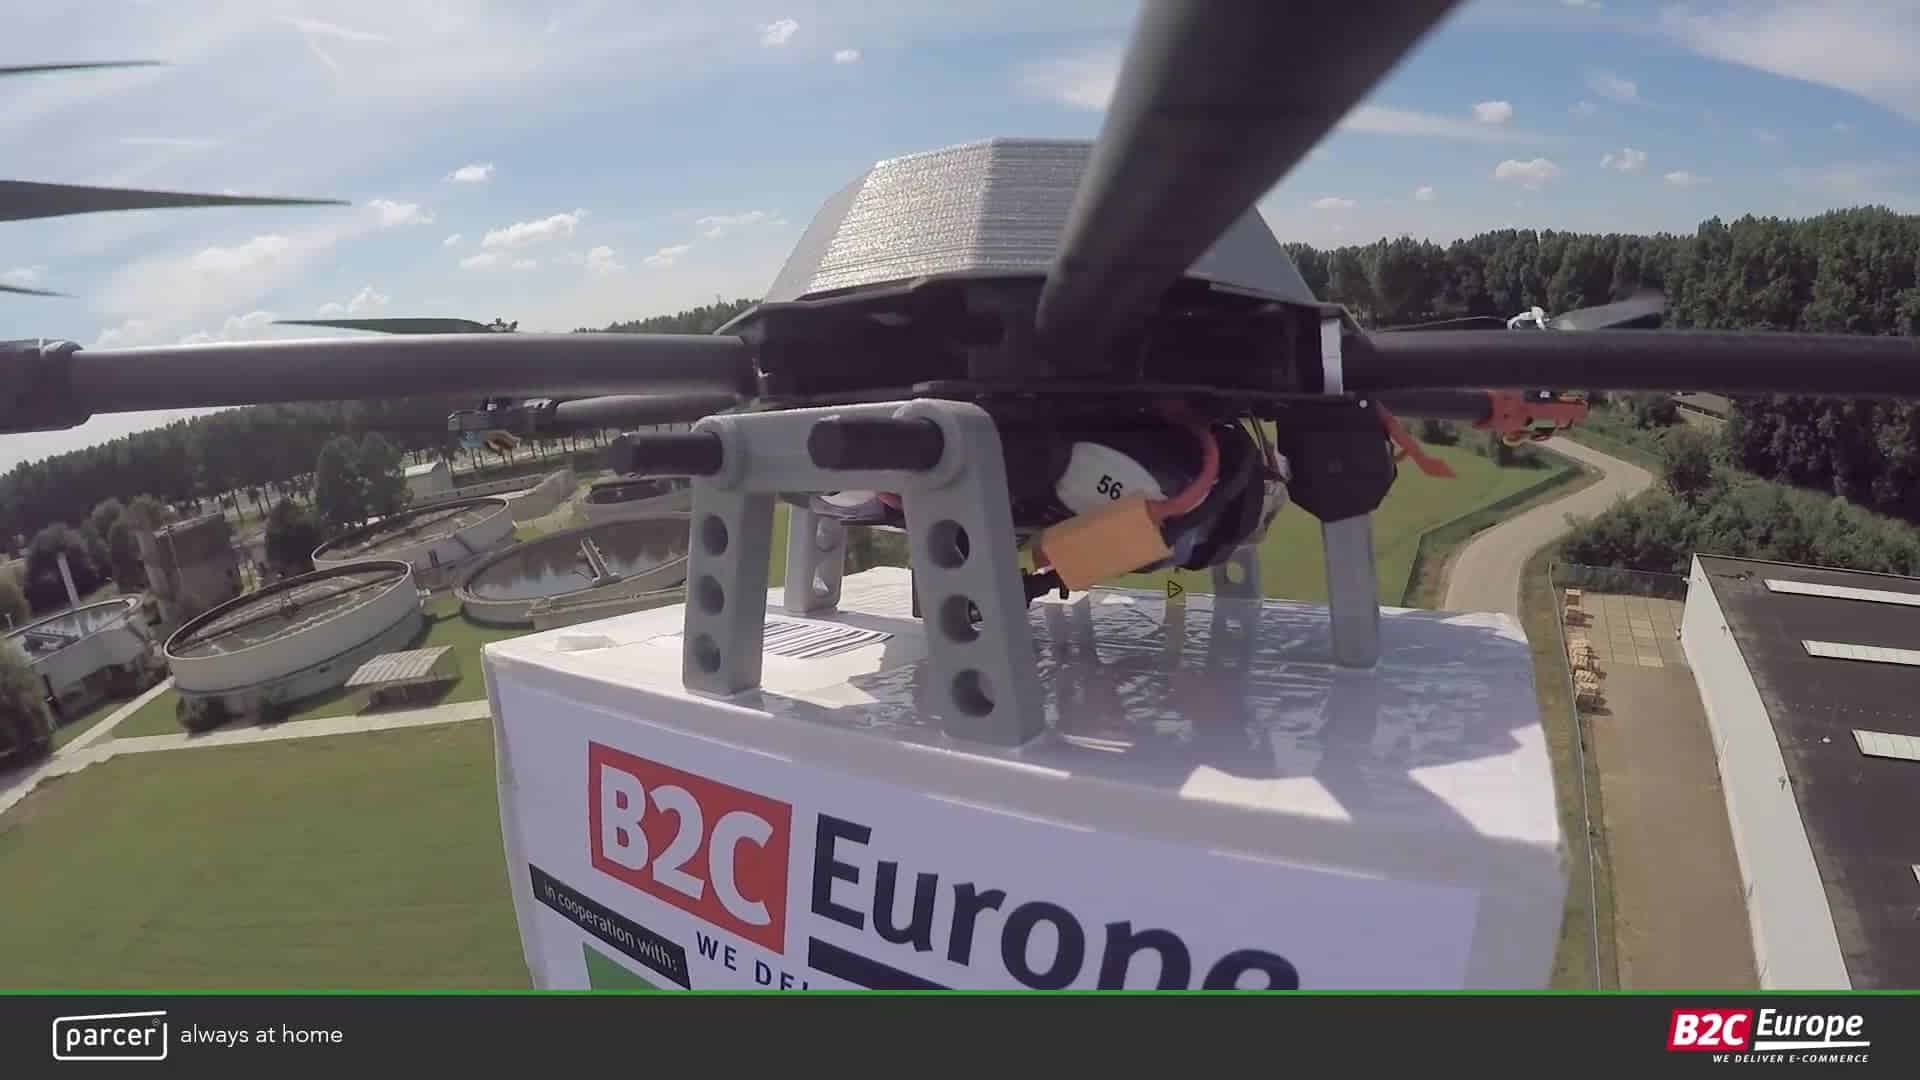 Drone deliveries: B2C Europe and Parcer trial